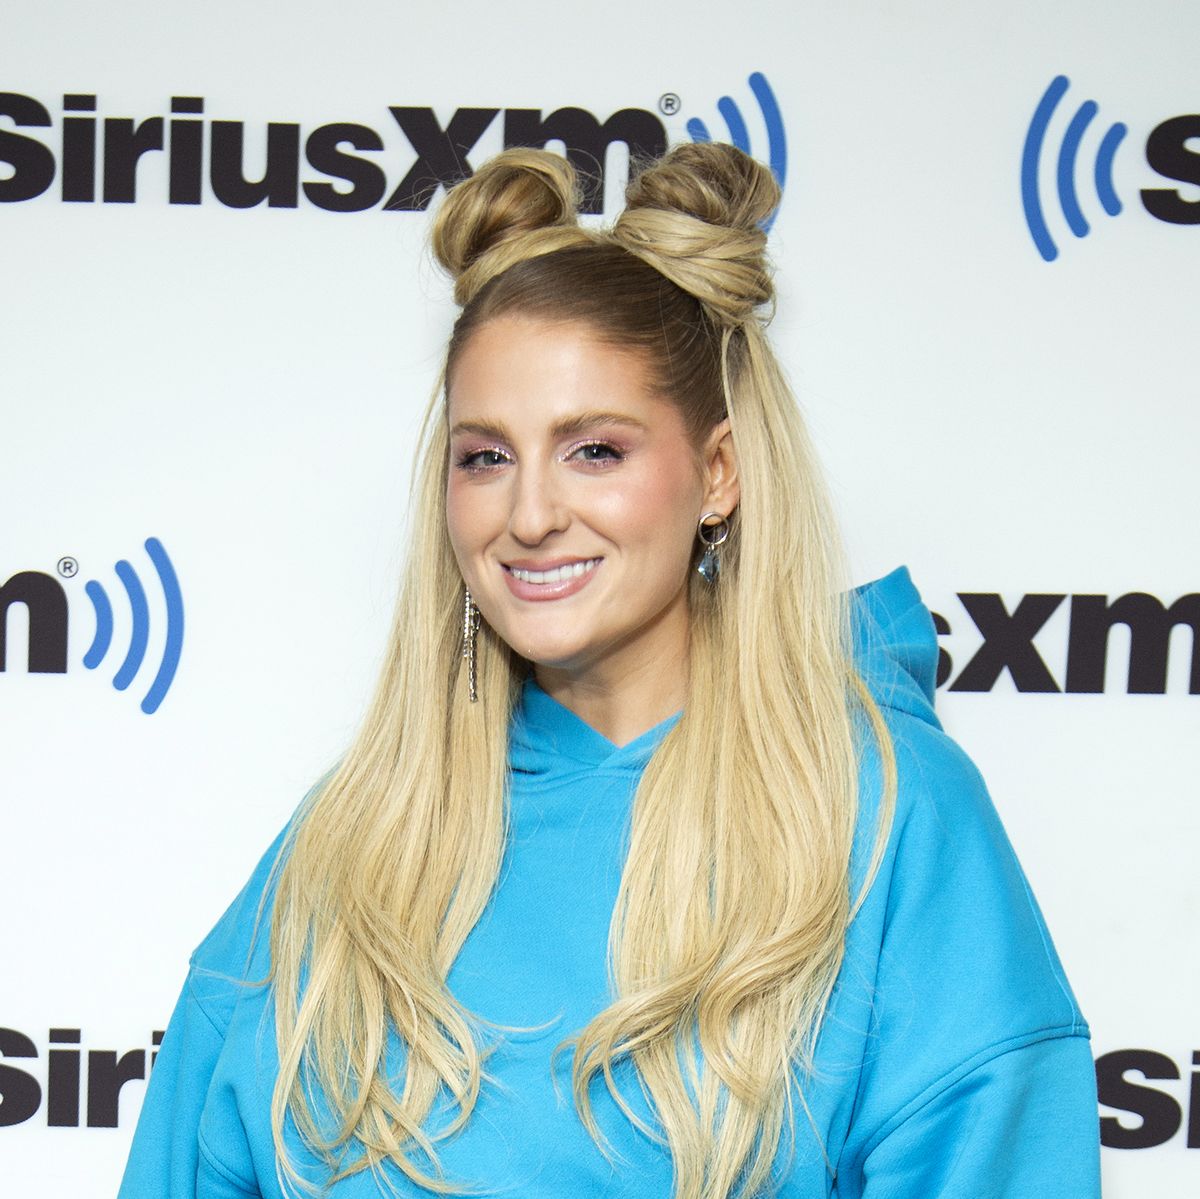 Meghan Trainor on losing weight after having her c-section